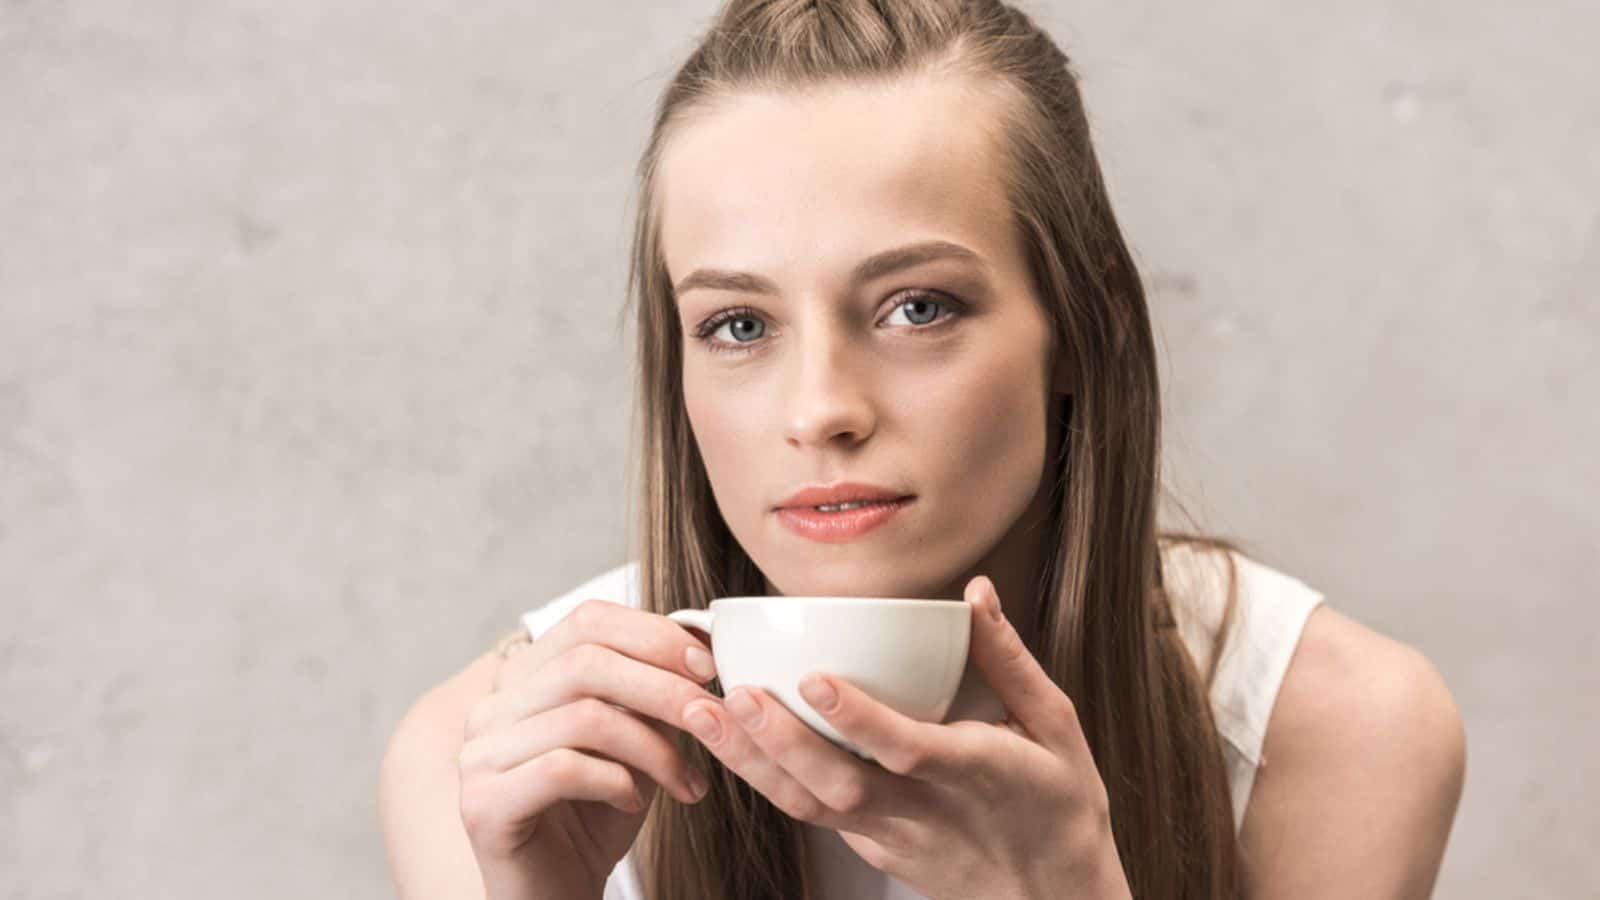 Young woman drinking coffee